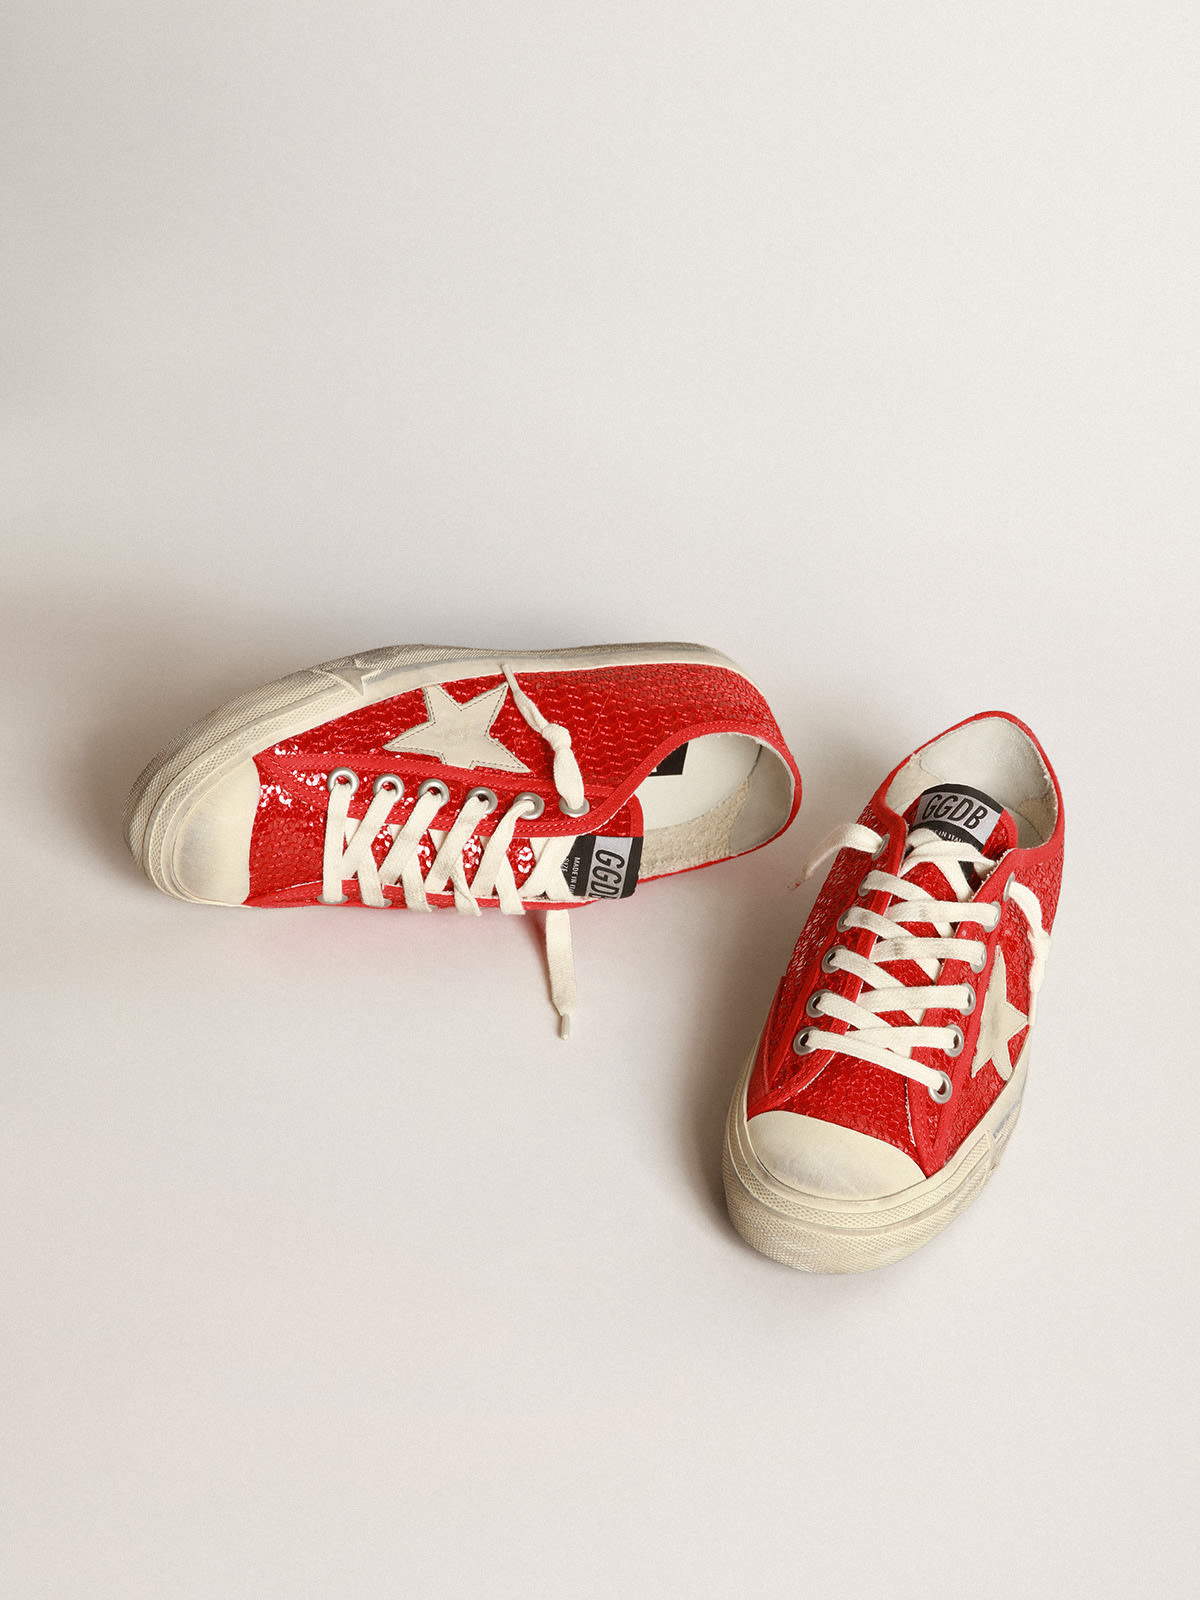 Golden Goose - V-Star sneakers in red sequins with cream-colored leather star and red grosgrain heel tab in 